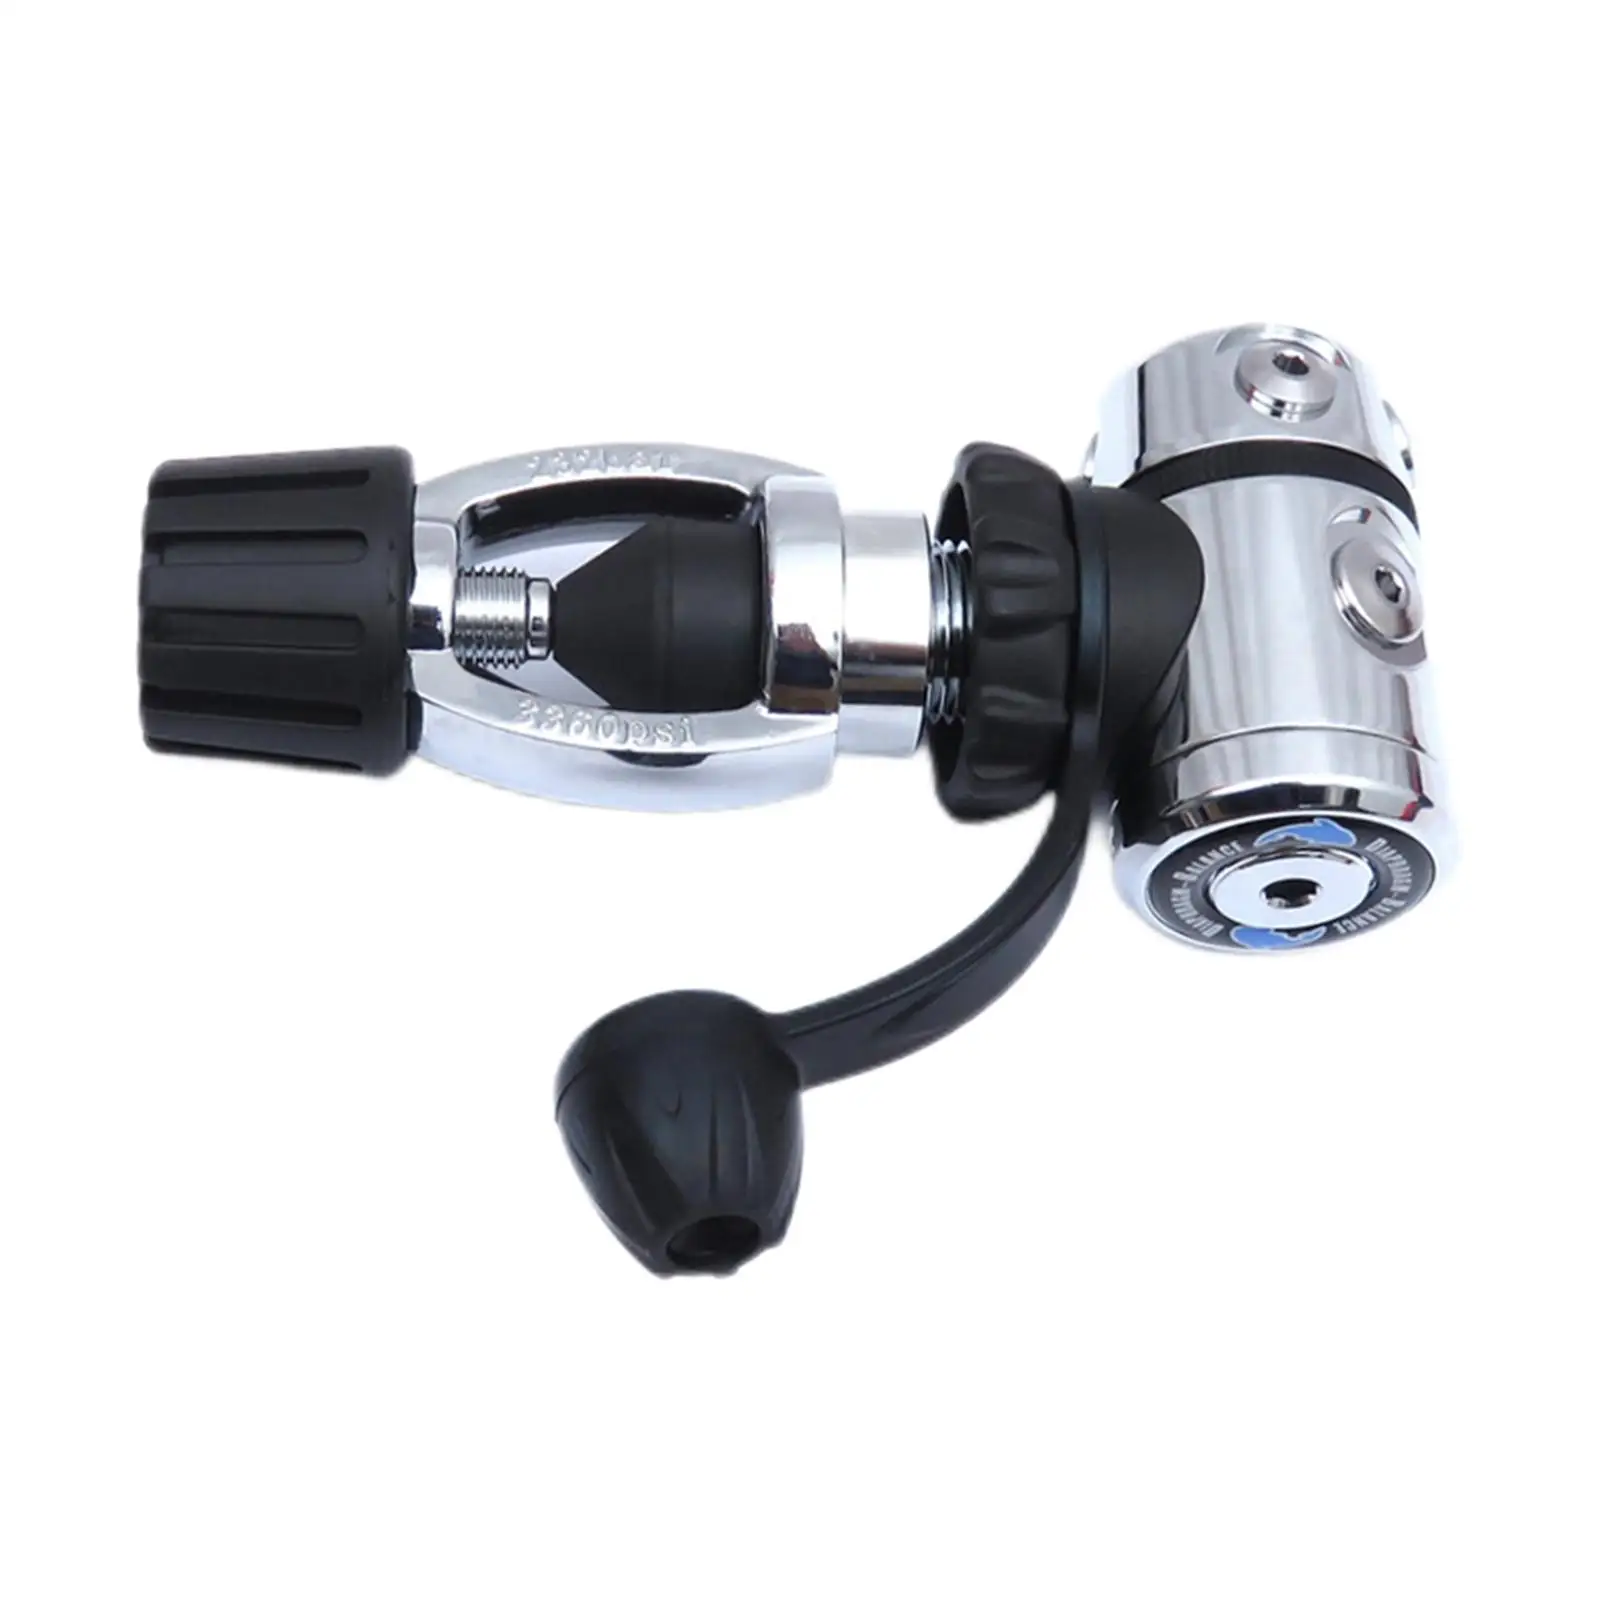 Underwater Scuba Diving Din to Yoke Regulator Adaptor 1ST First Stage Adapter Convertor with Dust Cover for Scuba Diving